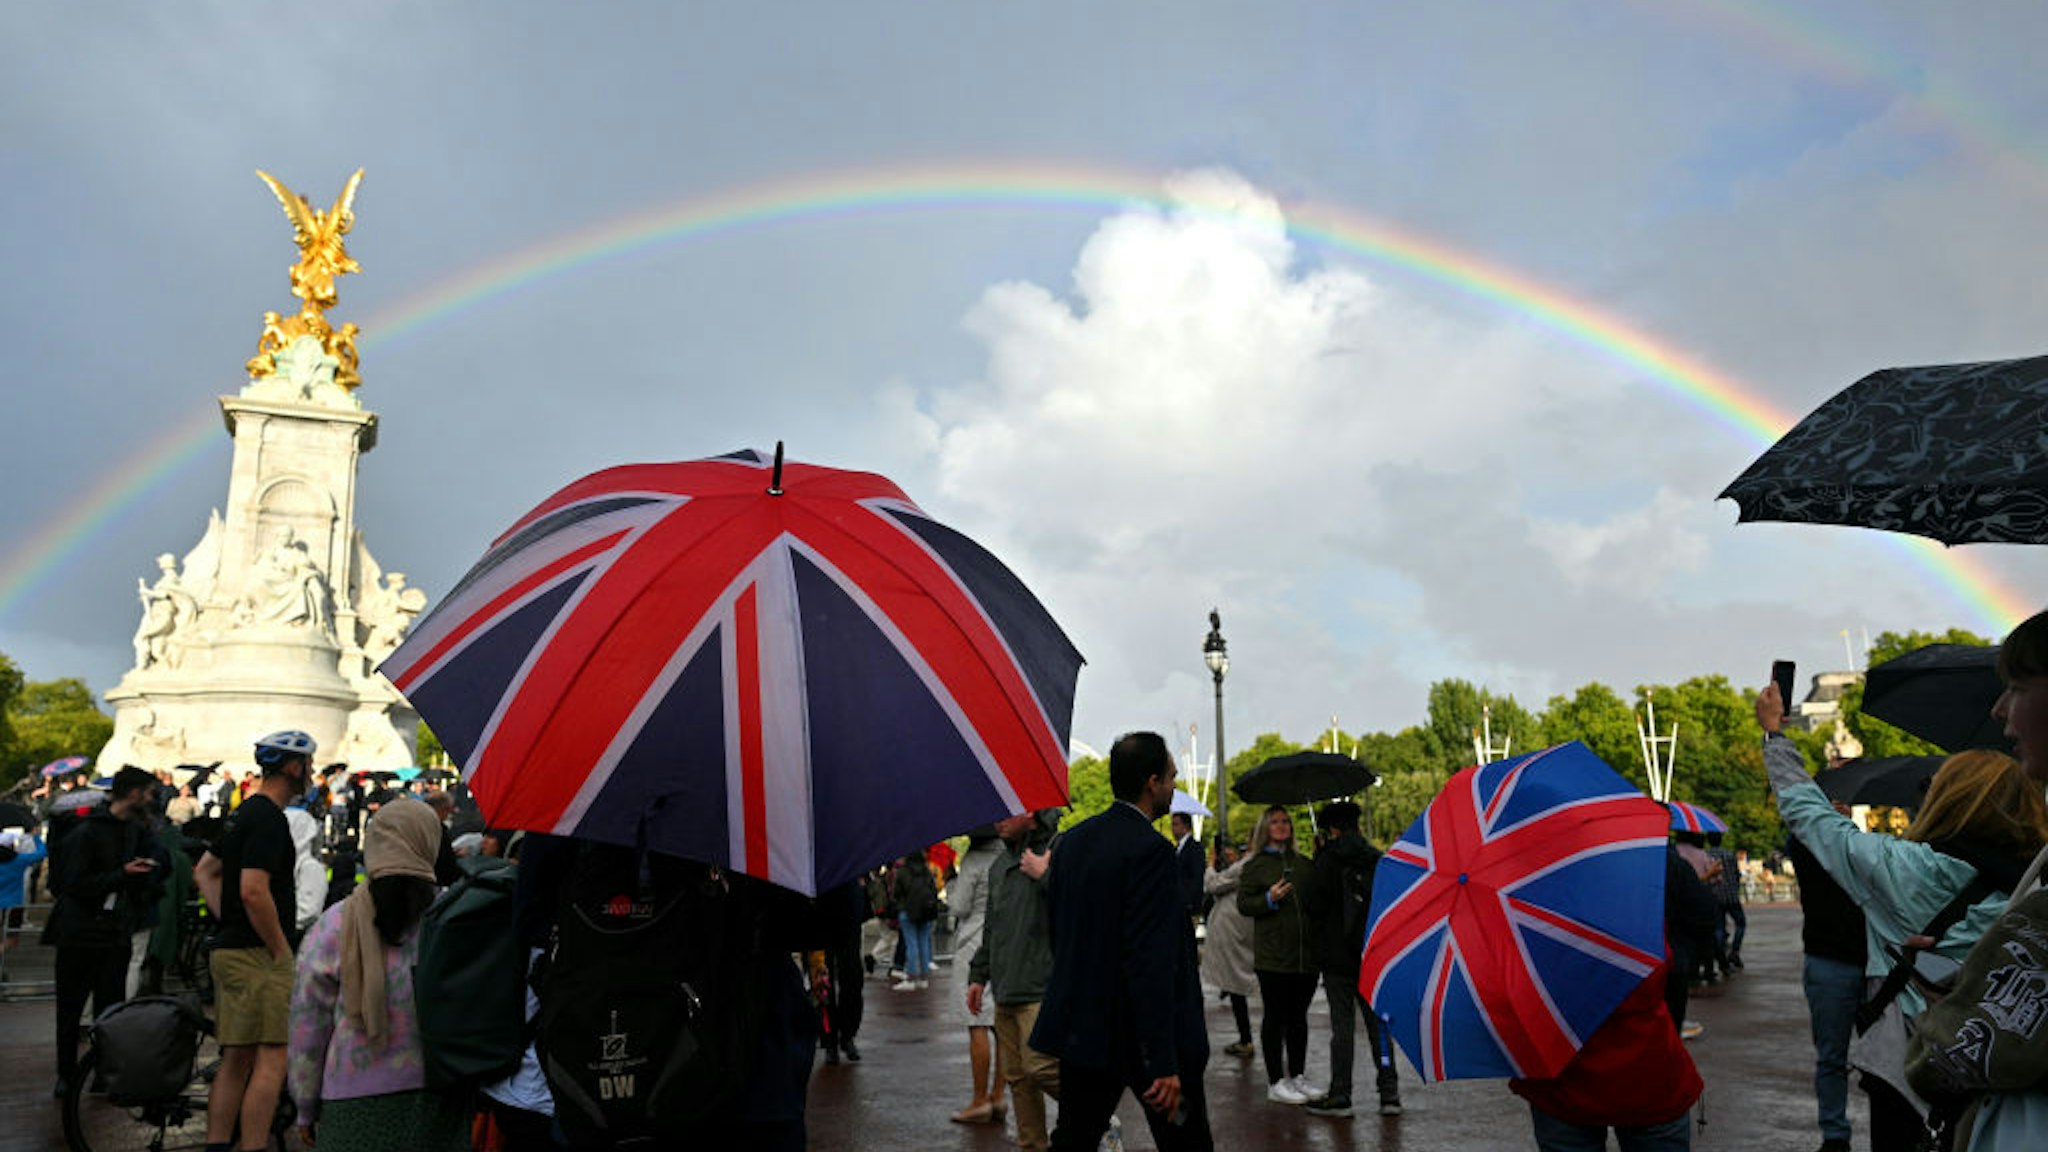 LONDON, ENGLAND - SEPTEMBER 08: A man looks on holding a Union flag umbrella as a rainbow is seen outside of Buckingham Palace on September 08, 2022 in London, England. Buckingham Palace issued a statement earlier today saying that Queen Elizabeth was placed under medical supervision due to concerns about her health.